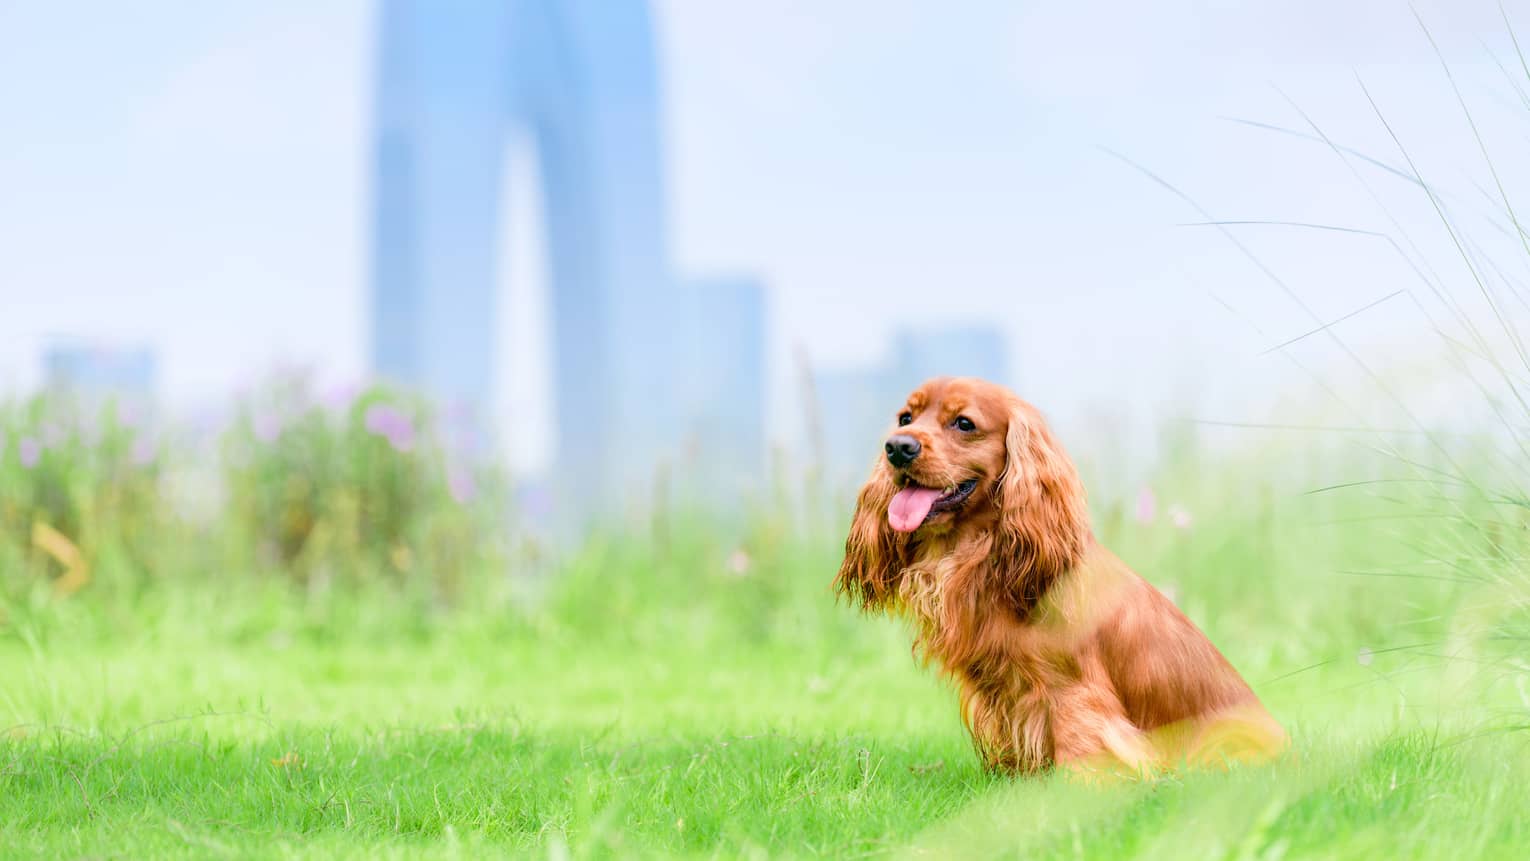 Dog sits on the grass with Suzhou city skyline in the background